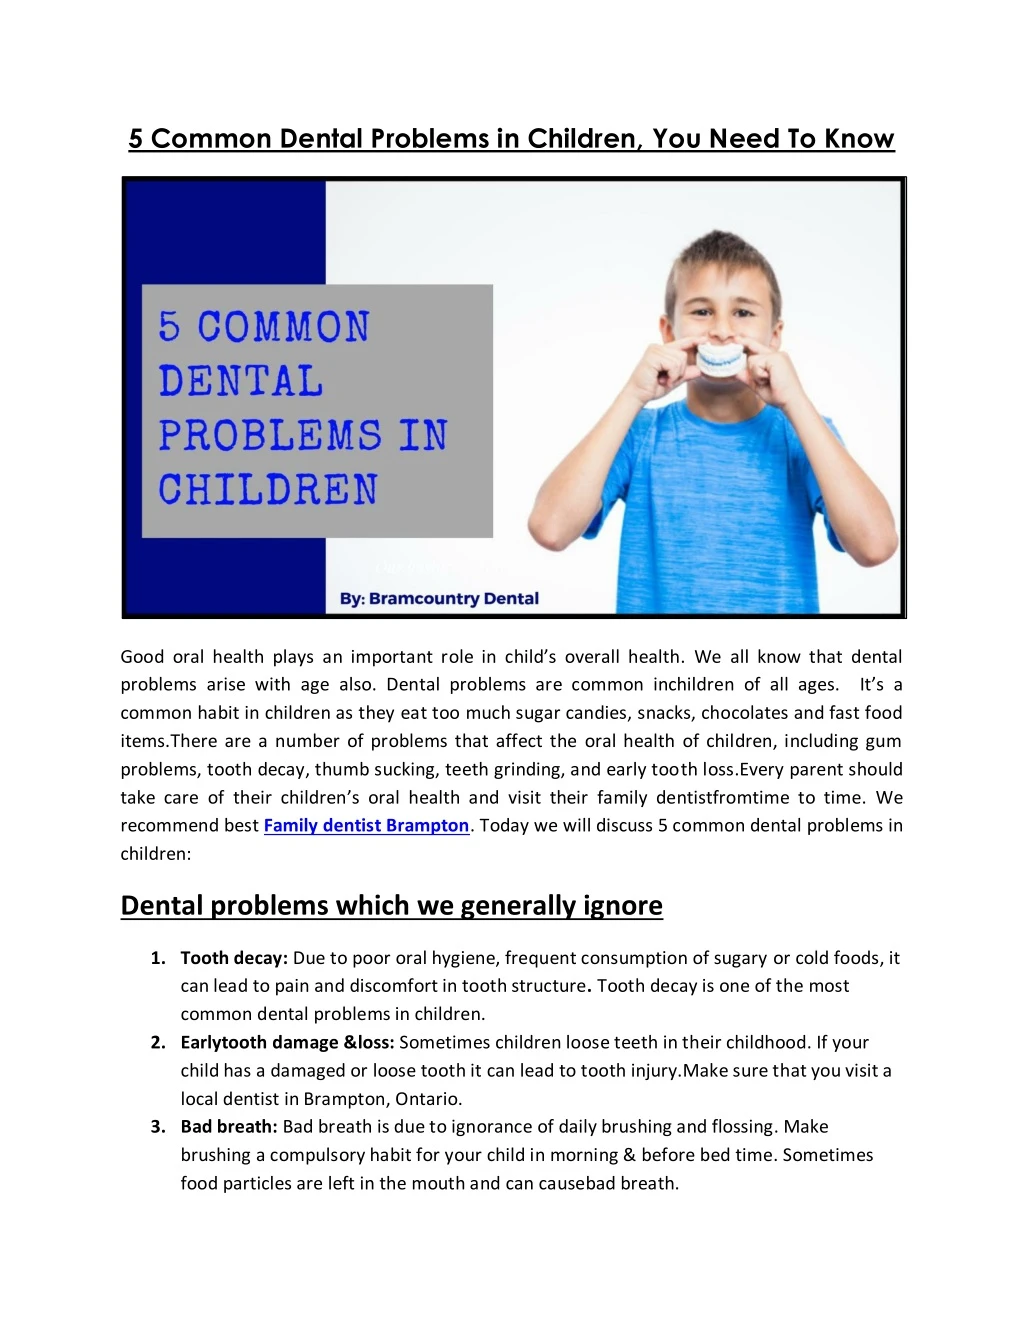 5 common dental problems in children you need